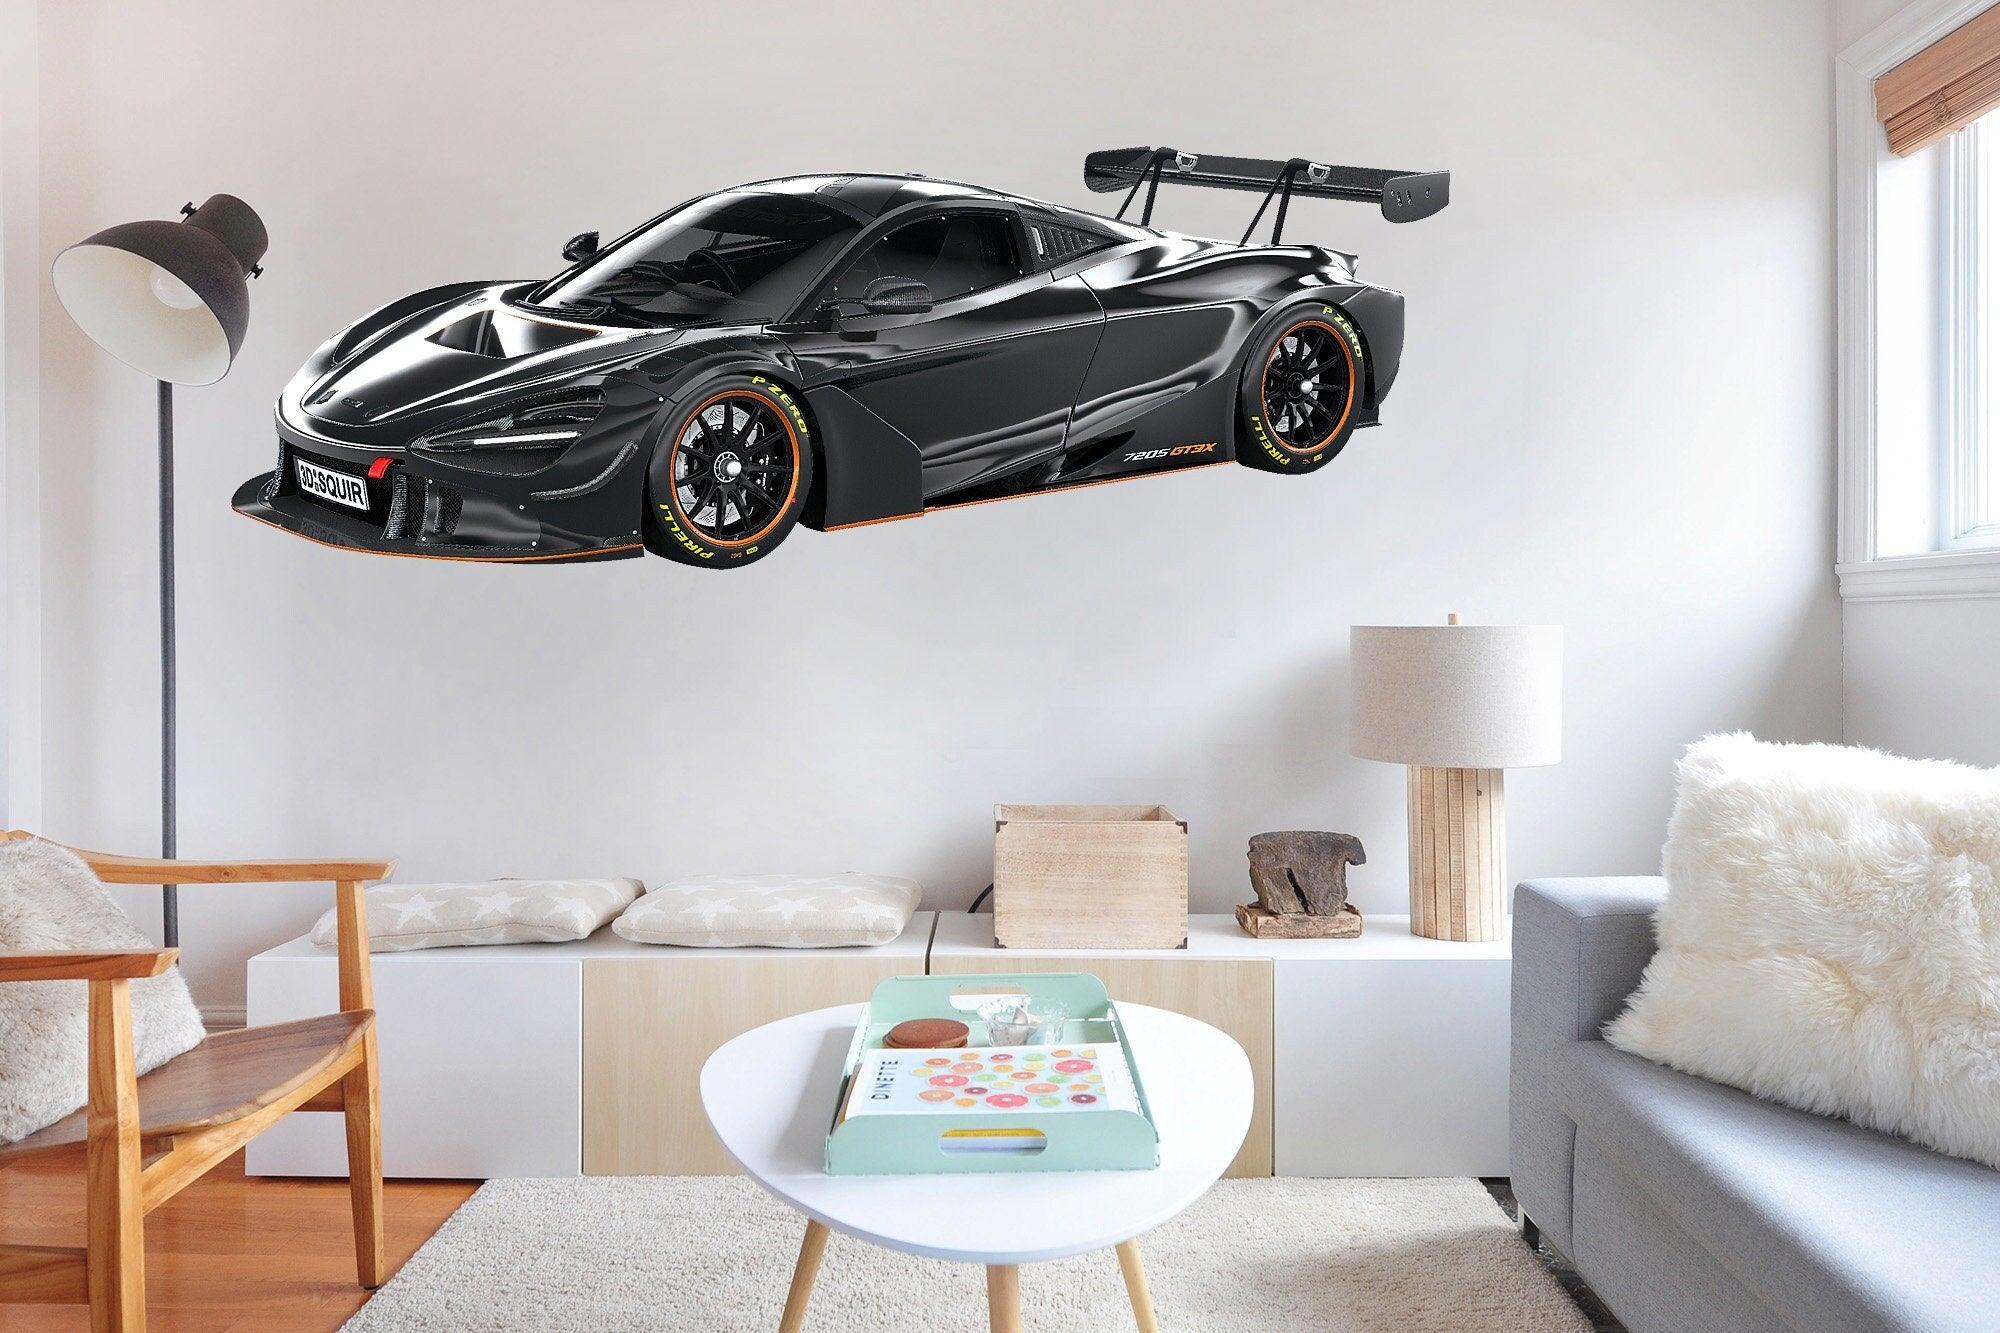 Mclaren 720s gt3x 2021 Wall Decal Luxury Hyper Exotic Sports Car Removable Fabric Wall Sticker Boys Bedroom Man Cave Wall Art Decor